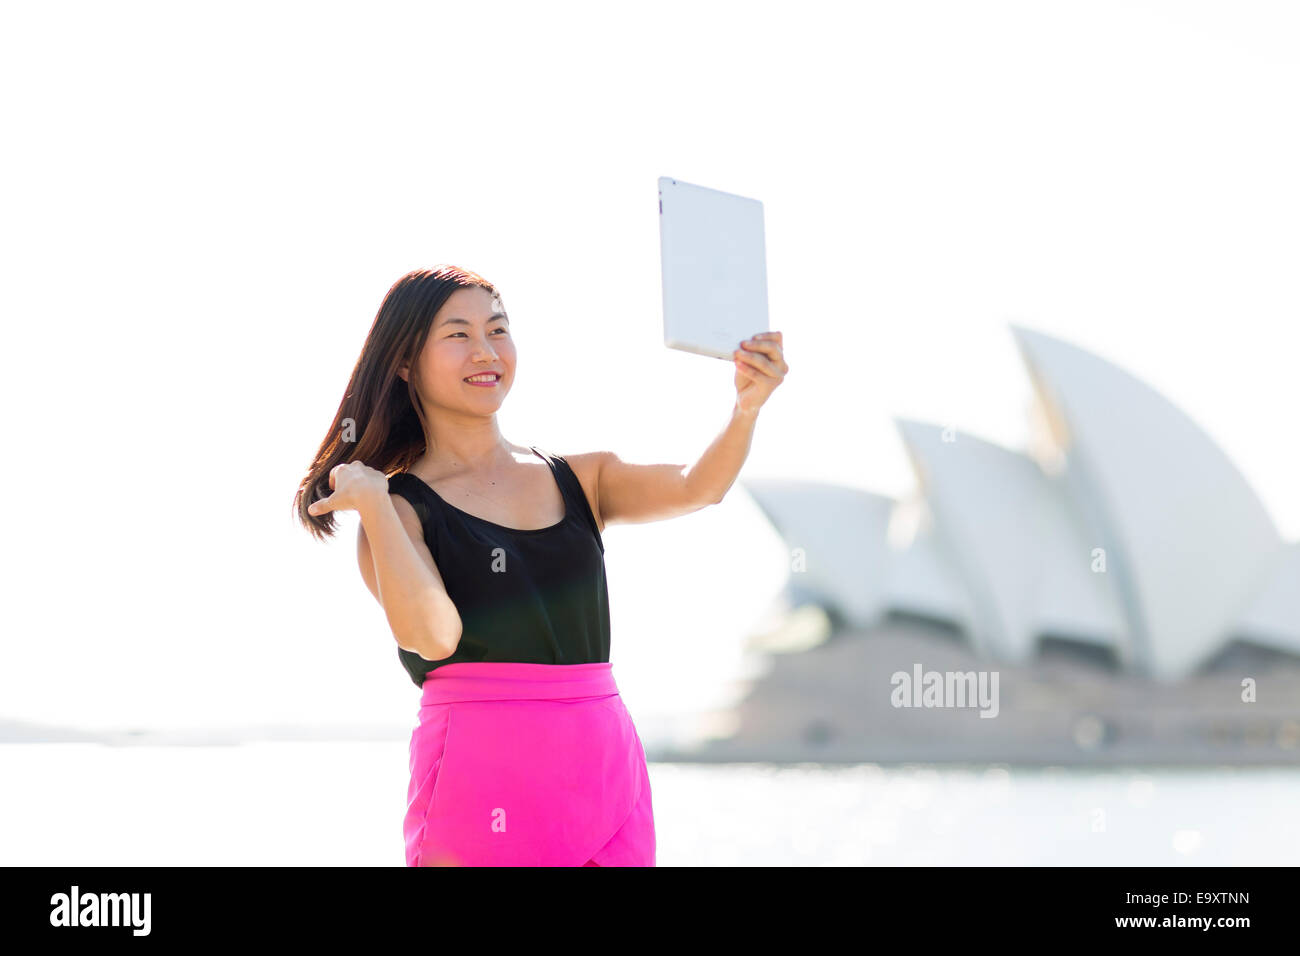 A young woman taking a 'selfie' outdoors Stock Photo